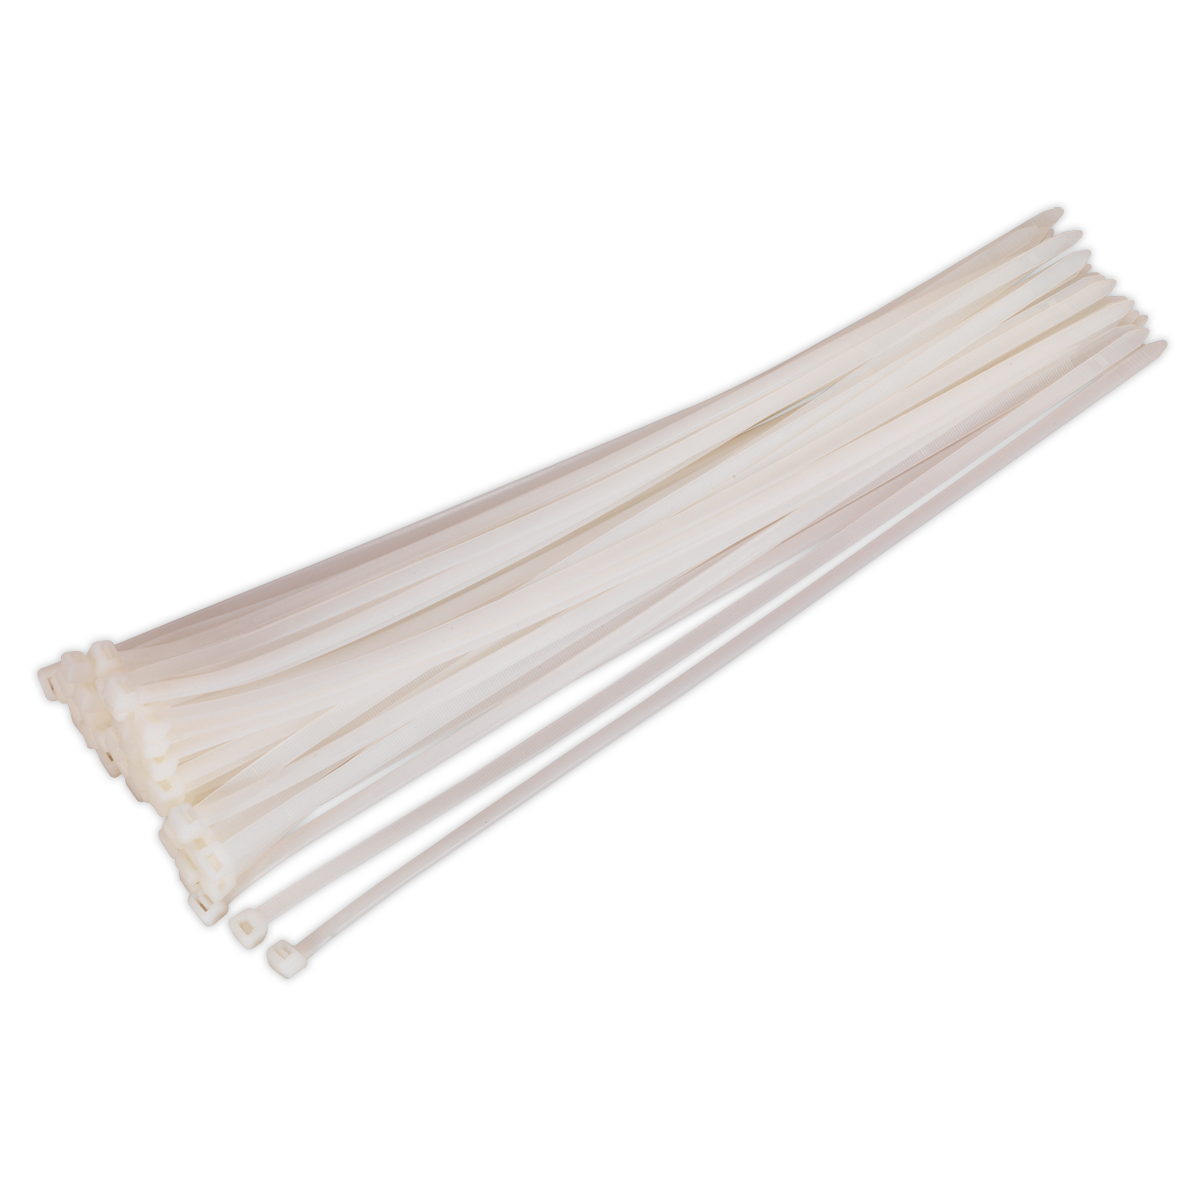 Cable Tie 450 x 7.6mm White Pack of 50 - CT45076P50W - Farming Parts